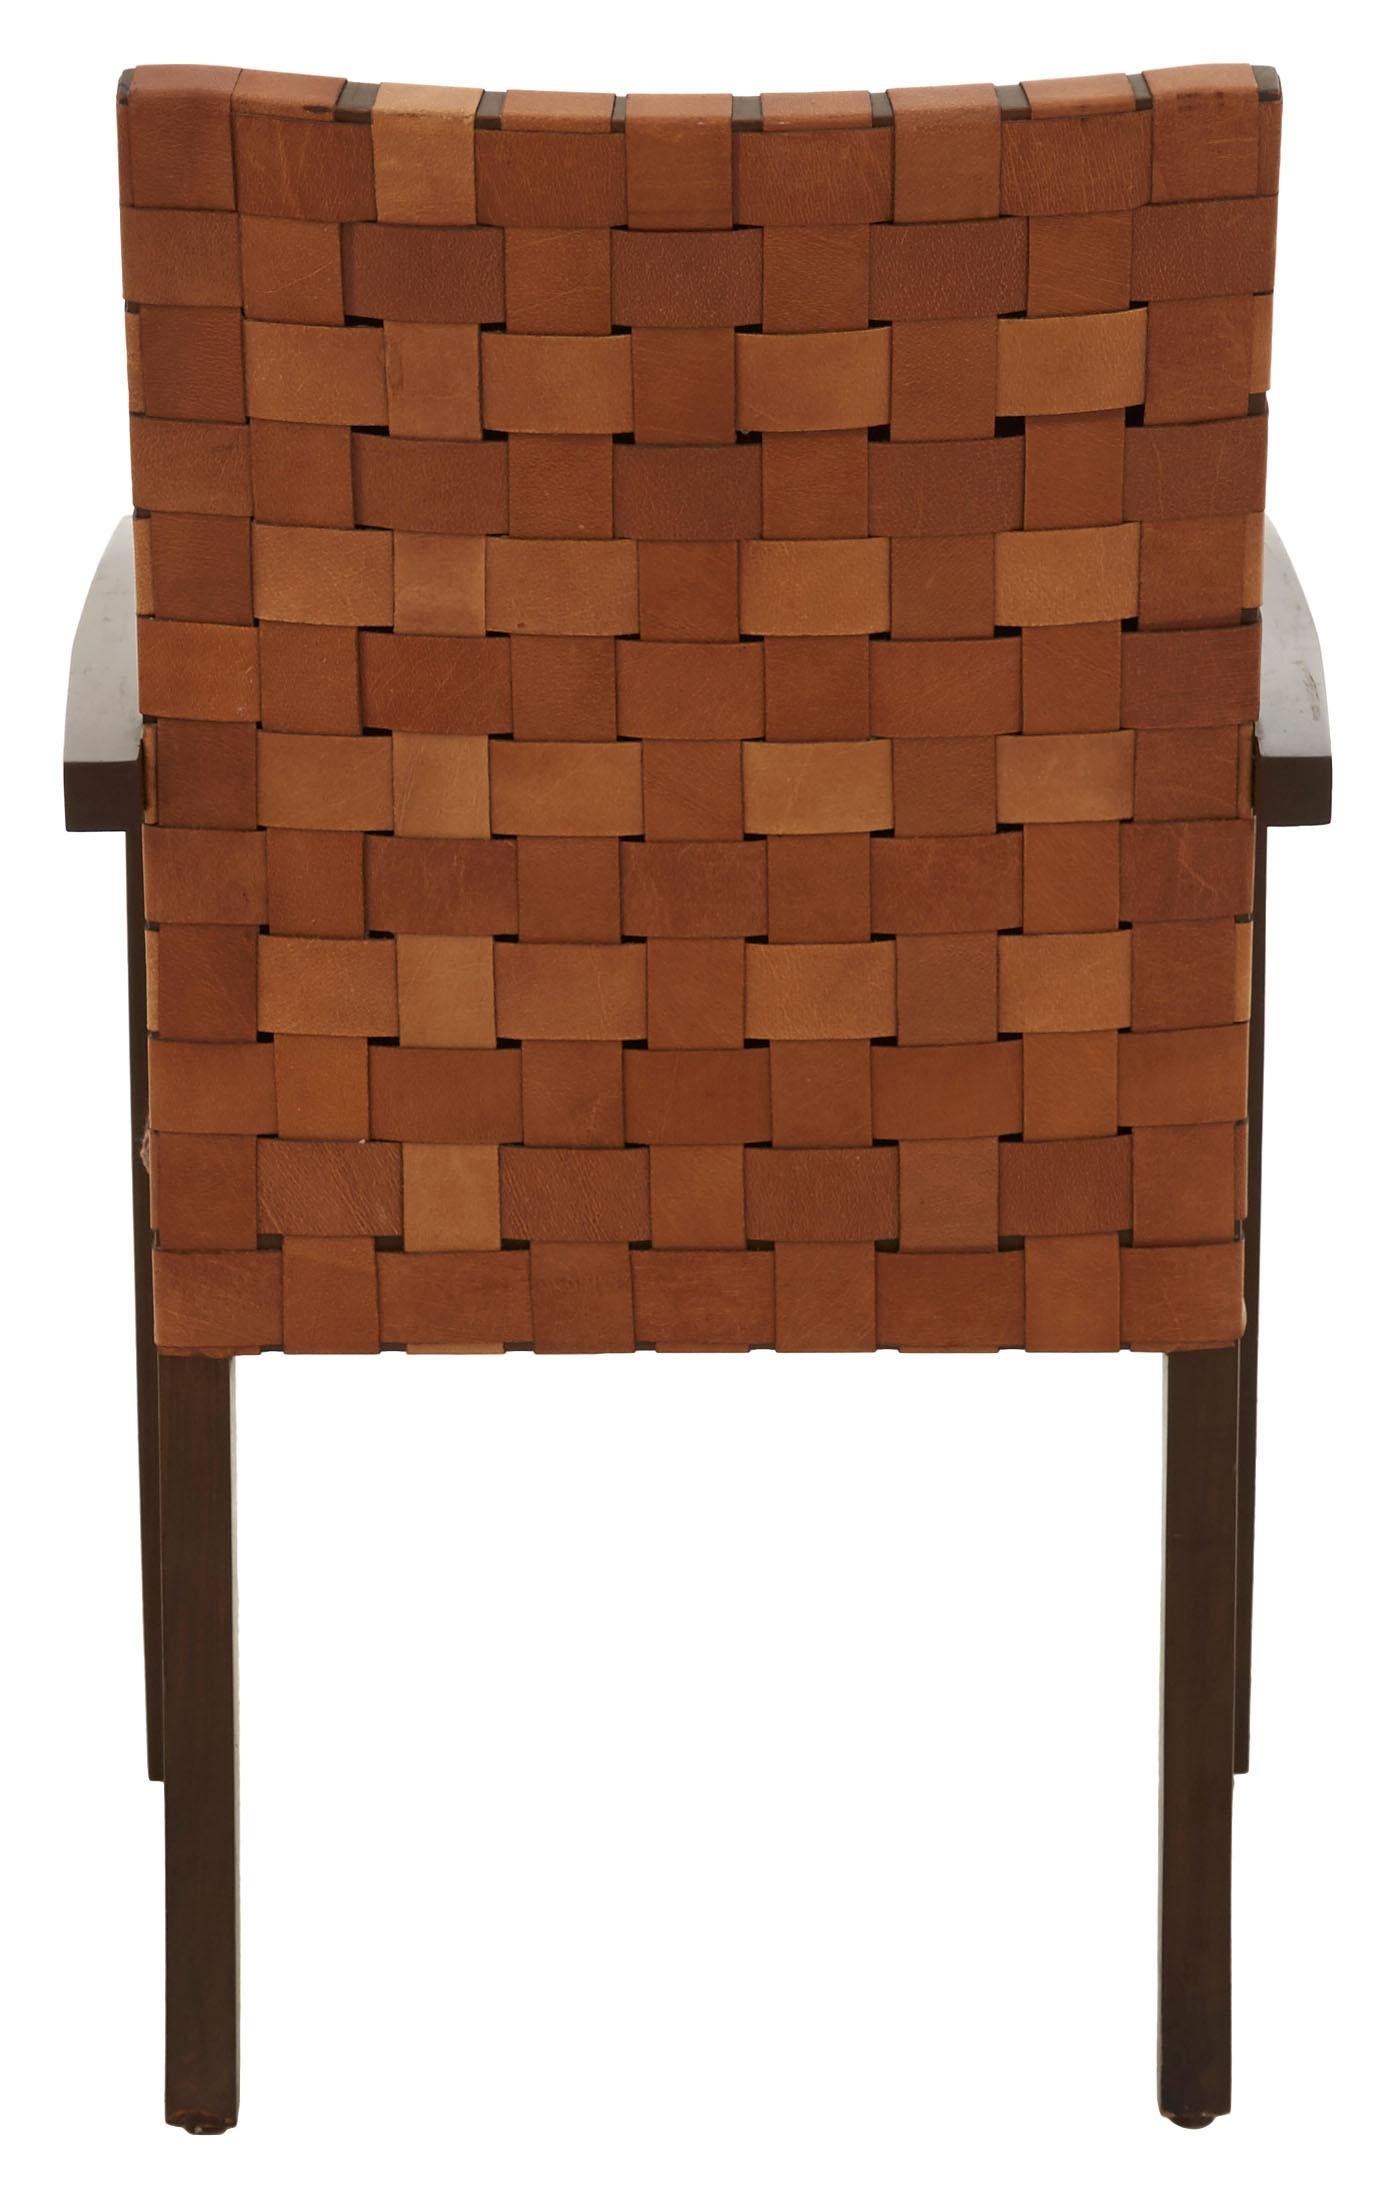 Woven Leather Back Dining Chair with Moroccan Rug Seat (amerikanisch)